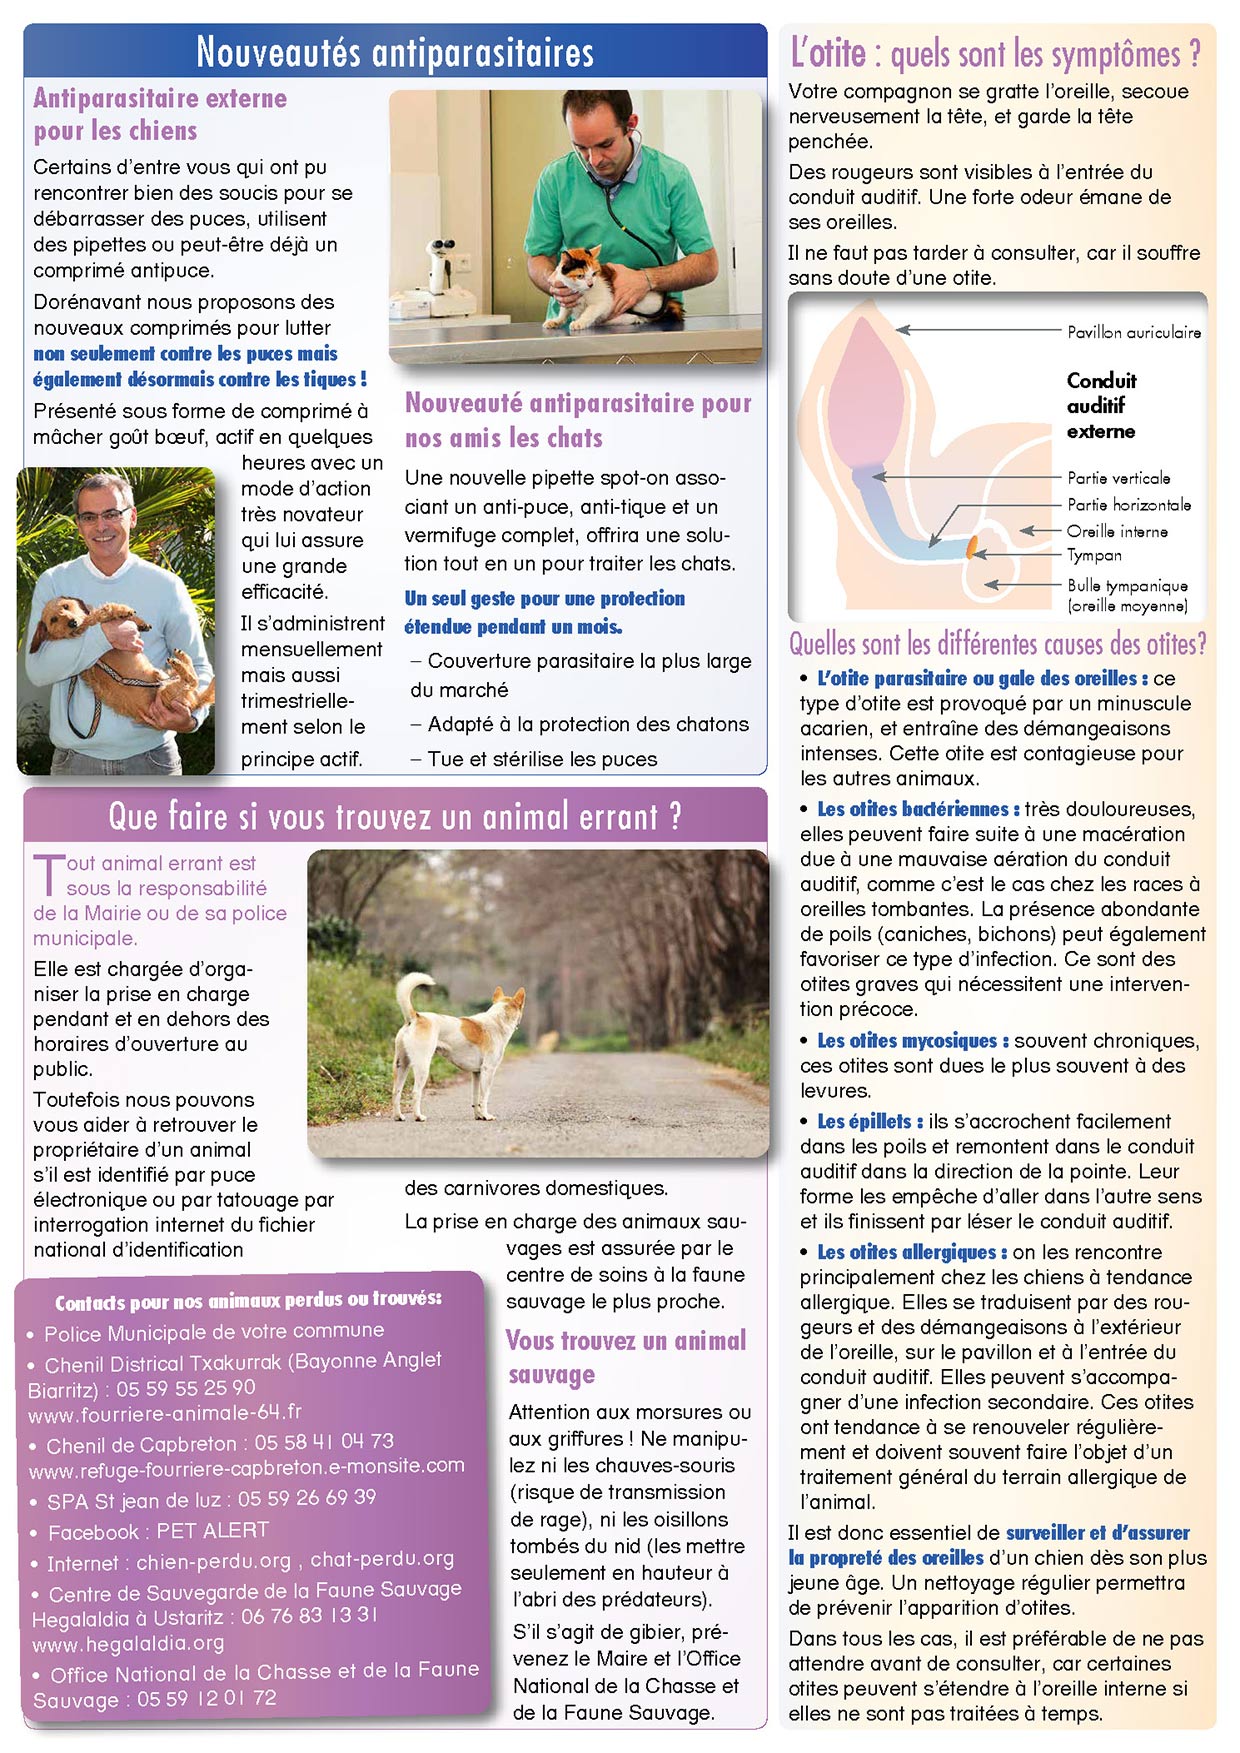 PARME Infos N°4 - Automne 2014 page 2